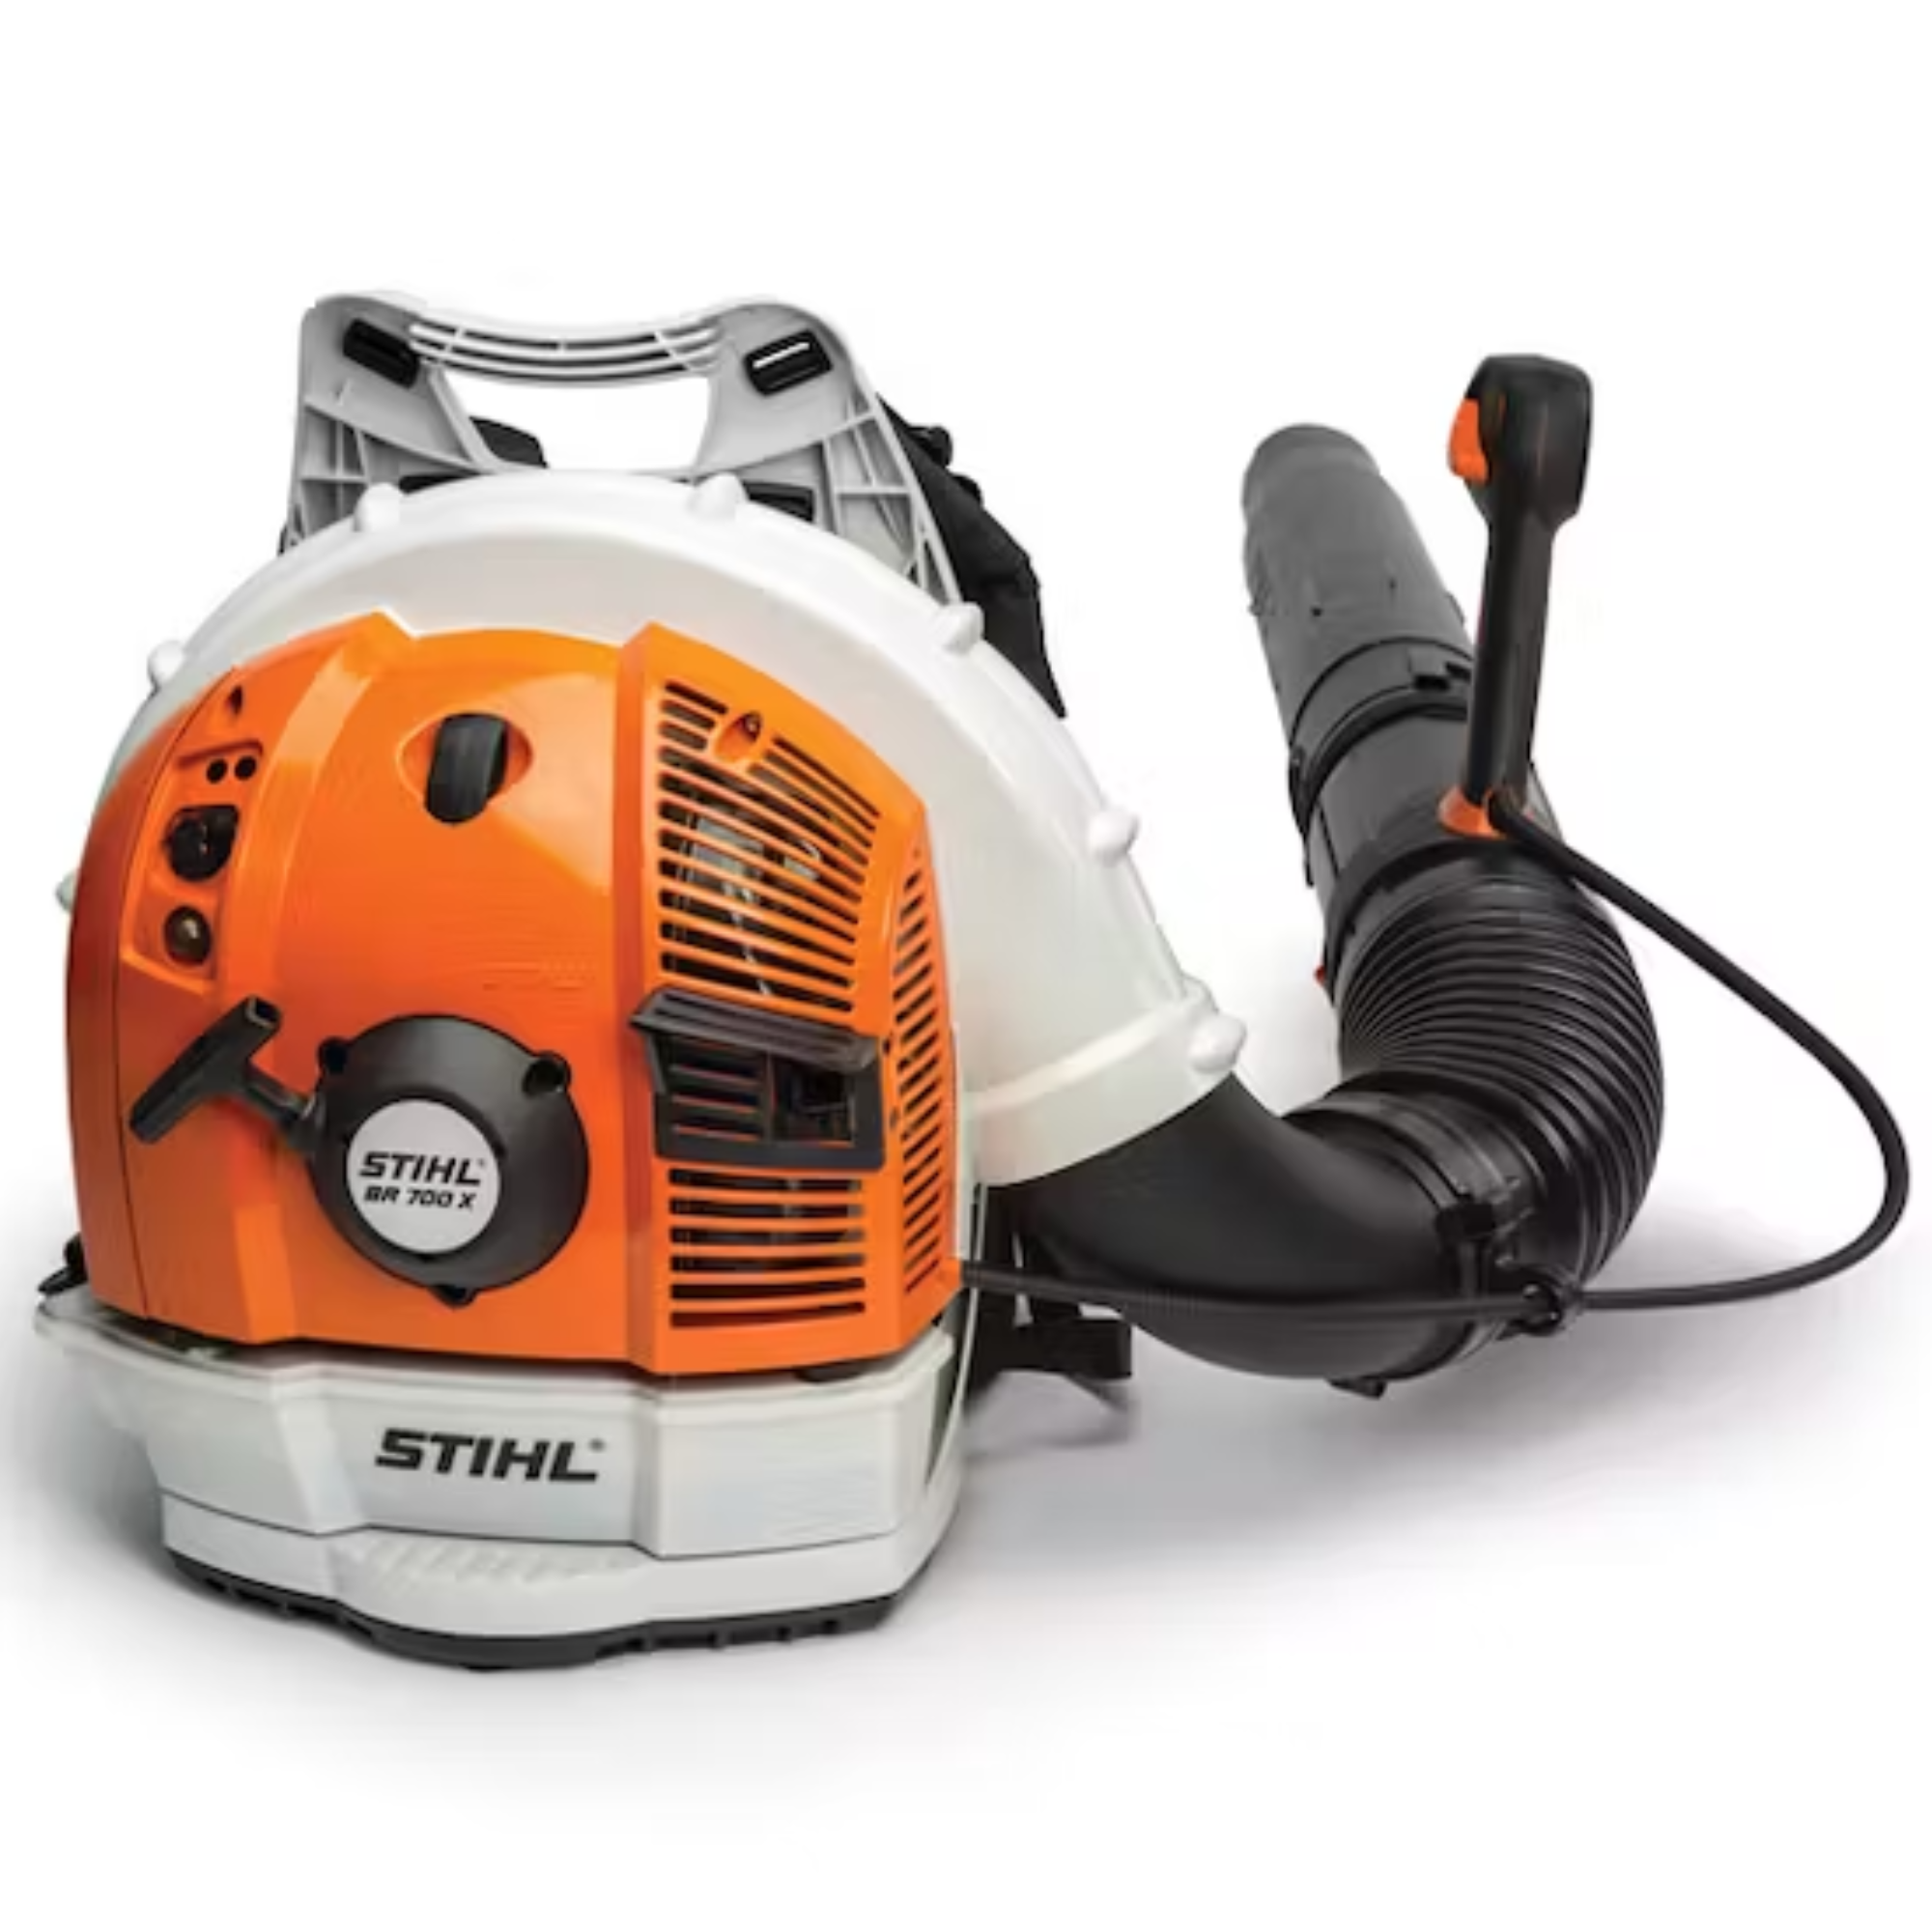 Stihl BR 700 X Gas Powered Backpack Blower